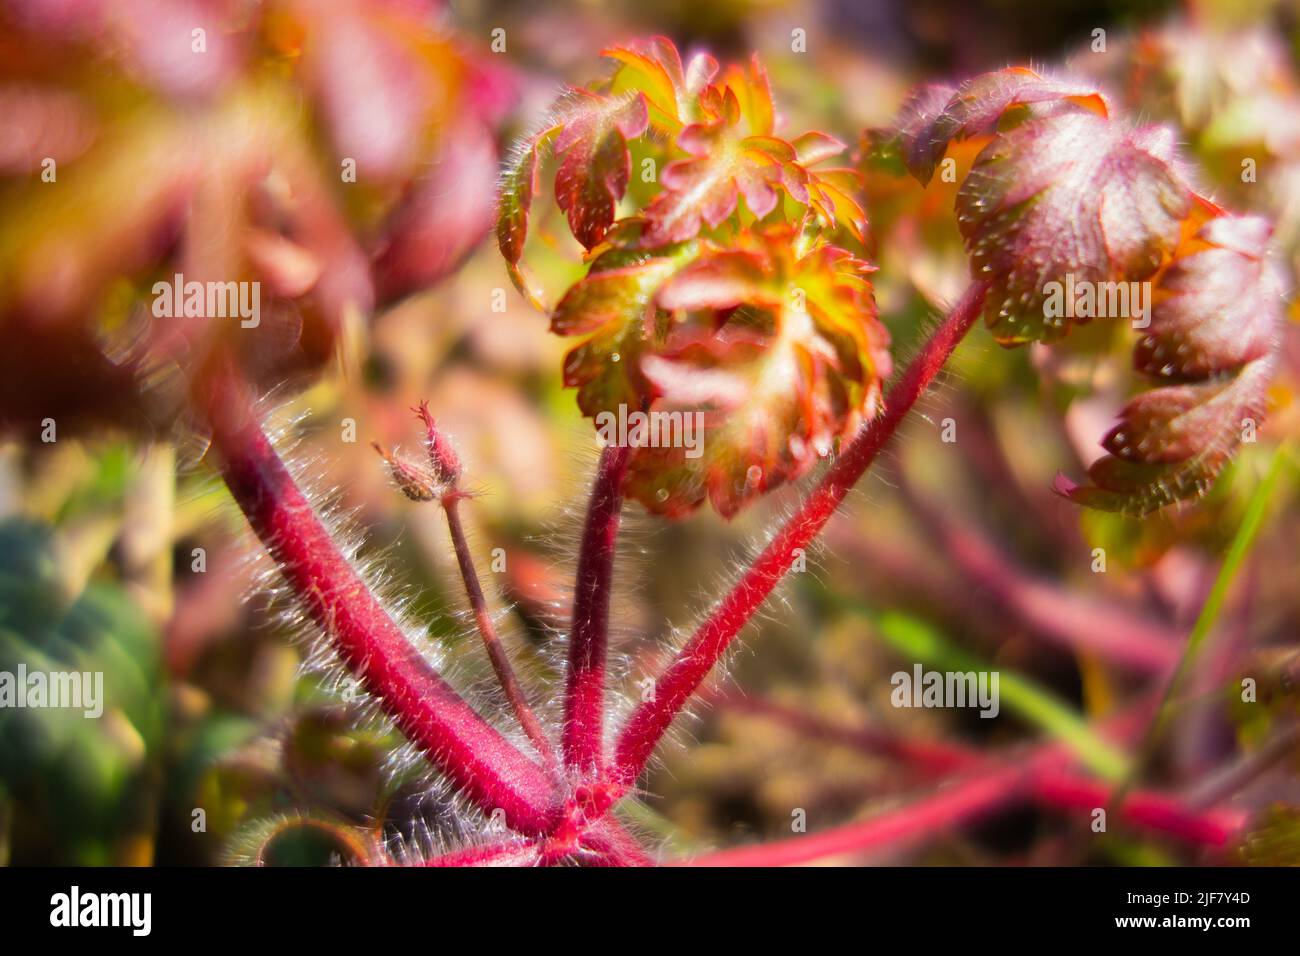 new green and brown leaves on red stems with a natural green background Stock Photo